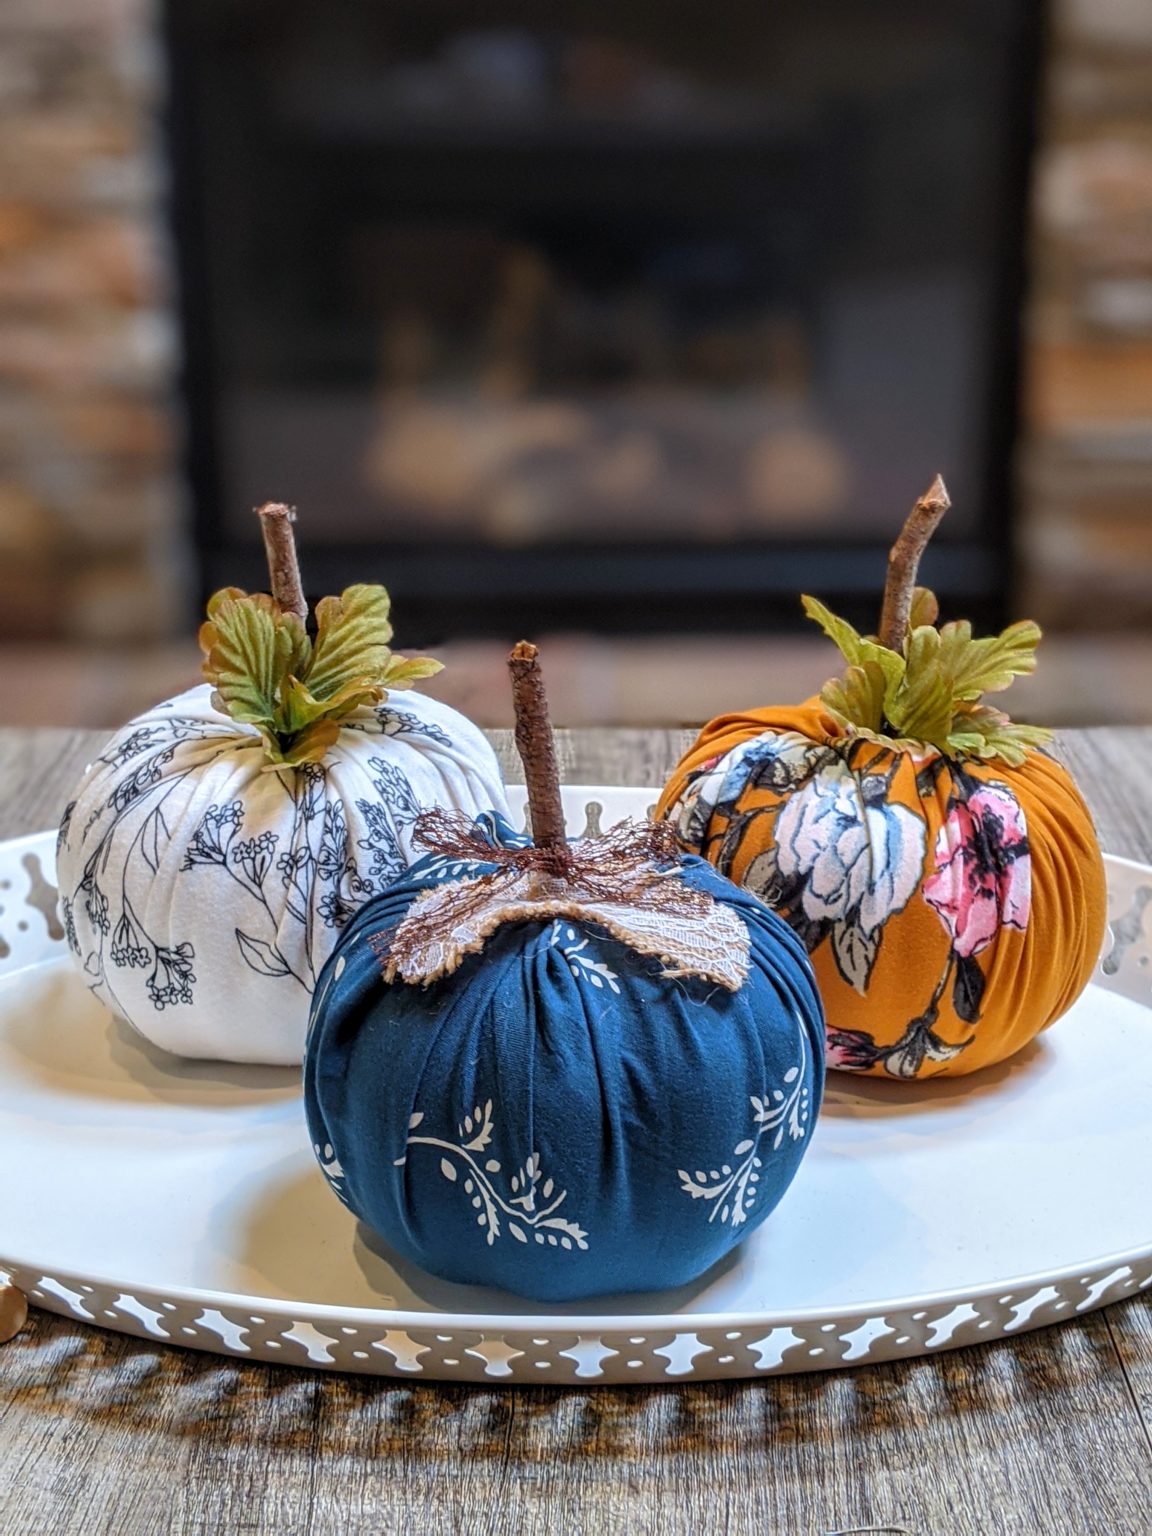 No-Sew Fabric Wrapped Pumpkins DIY - 5 out of 4 Patterns